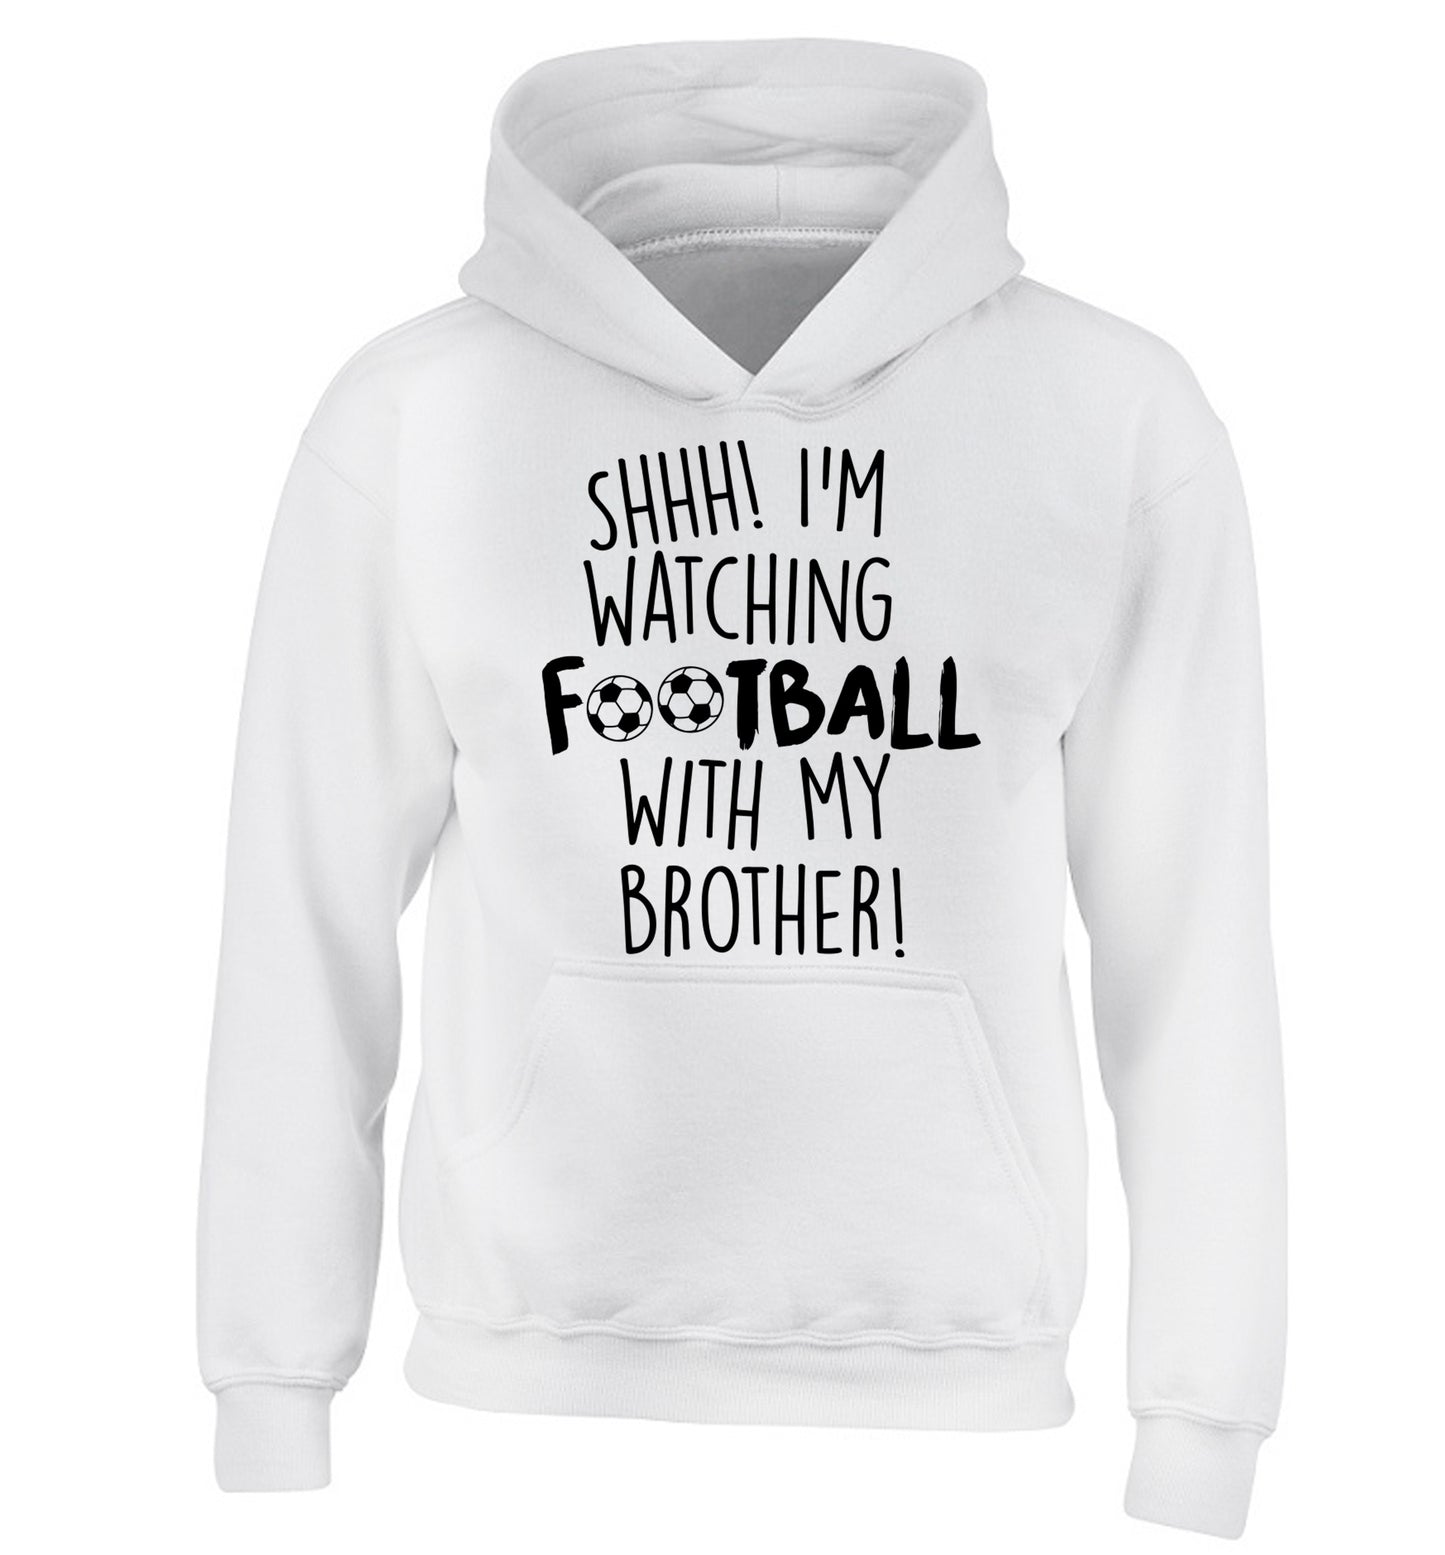 Shhh I'm watching football with my brother children's white hoodie 12-14 Years